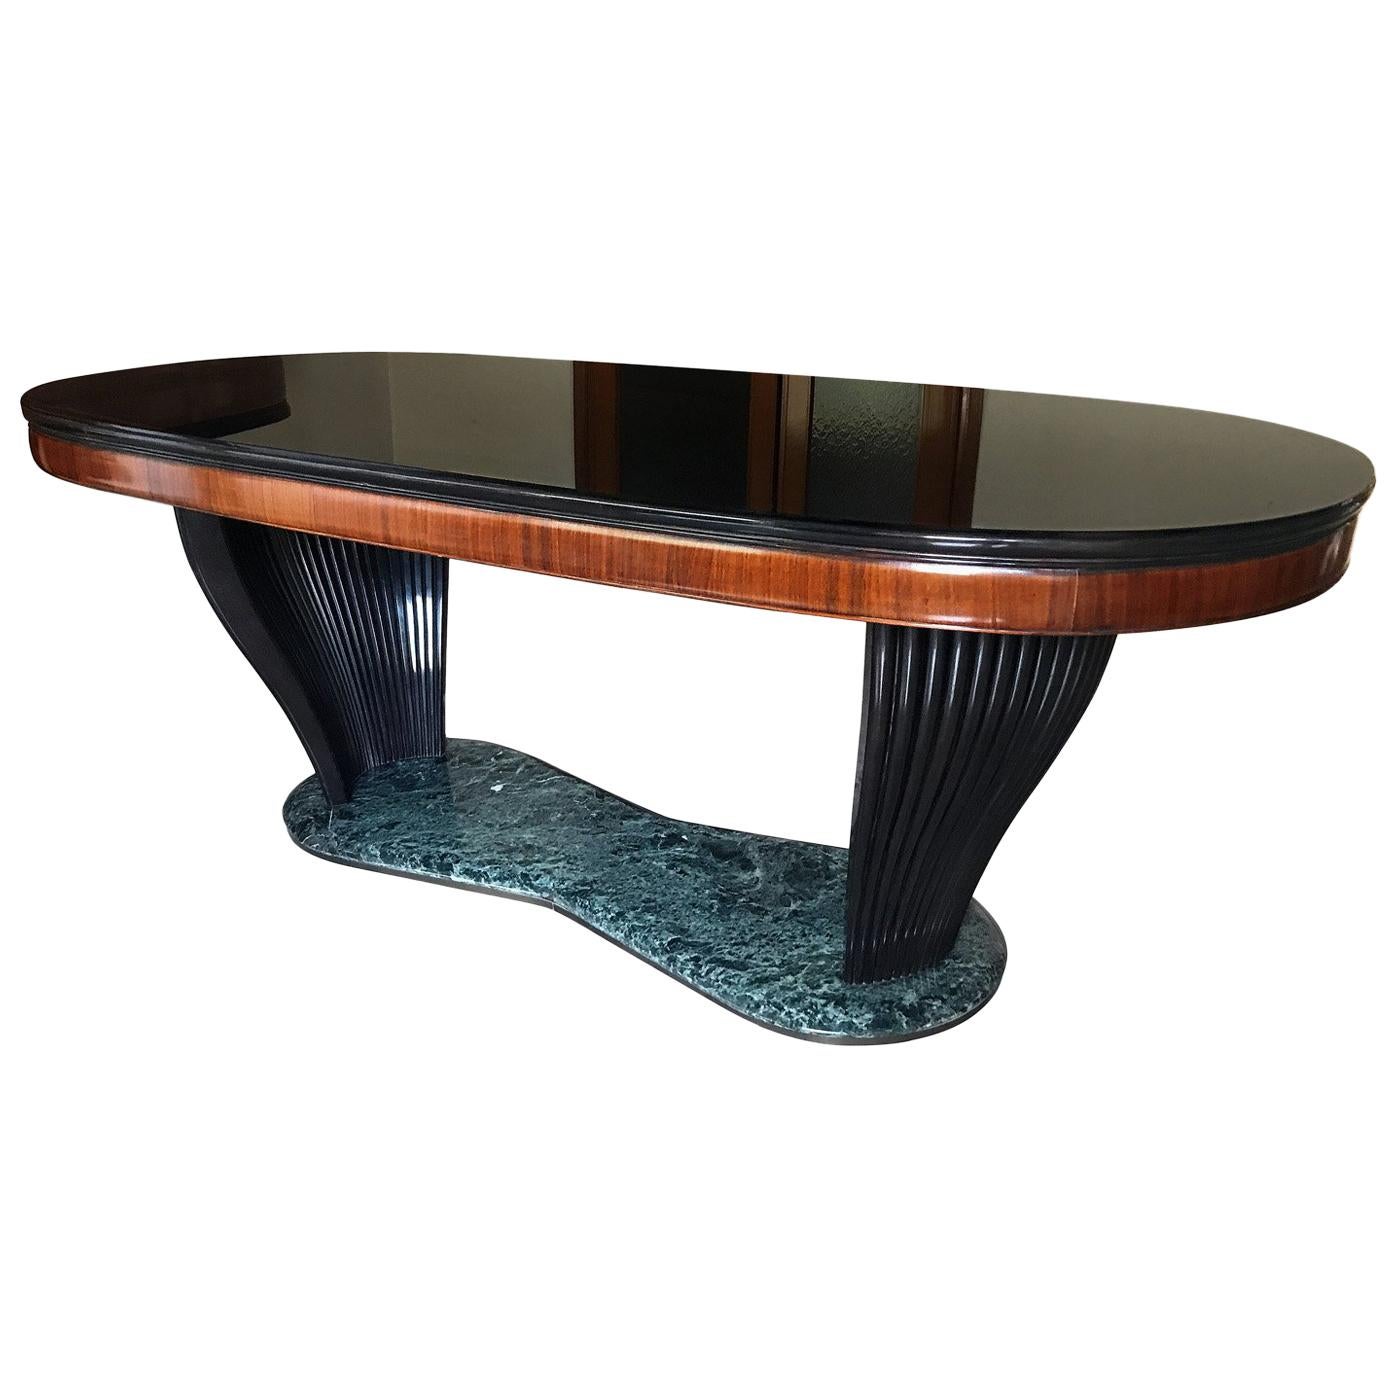 Italian Mid-Century Dining Table with Black Opaline Top by Vittorio Dassi, 1950s